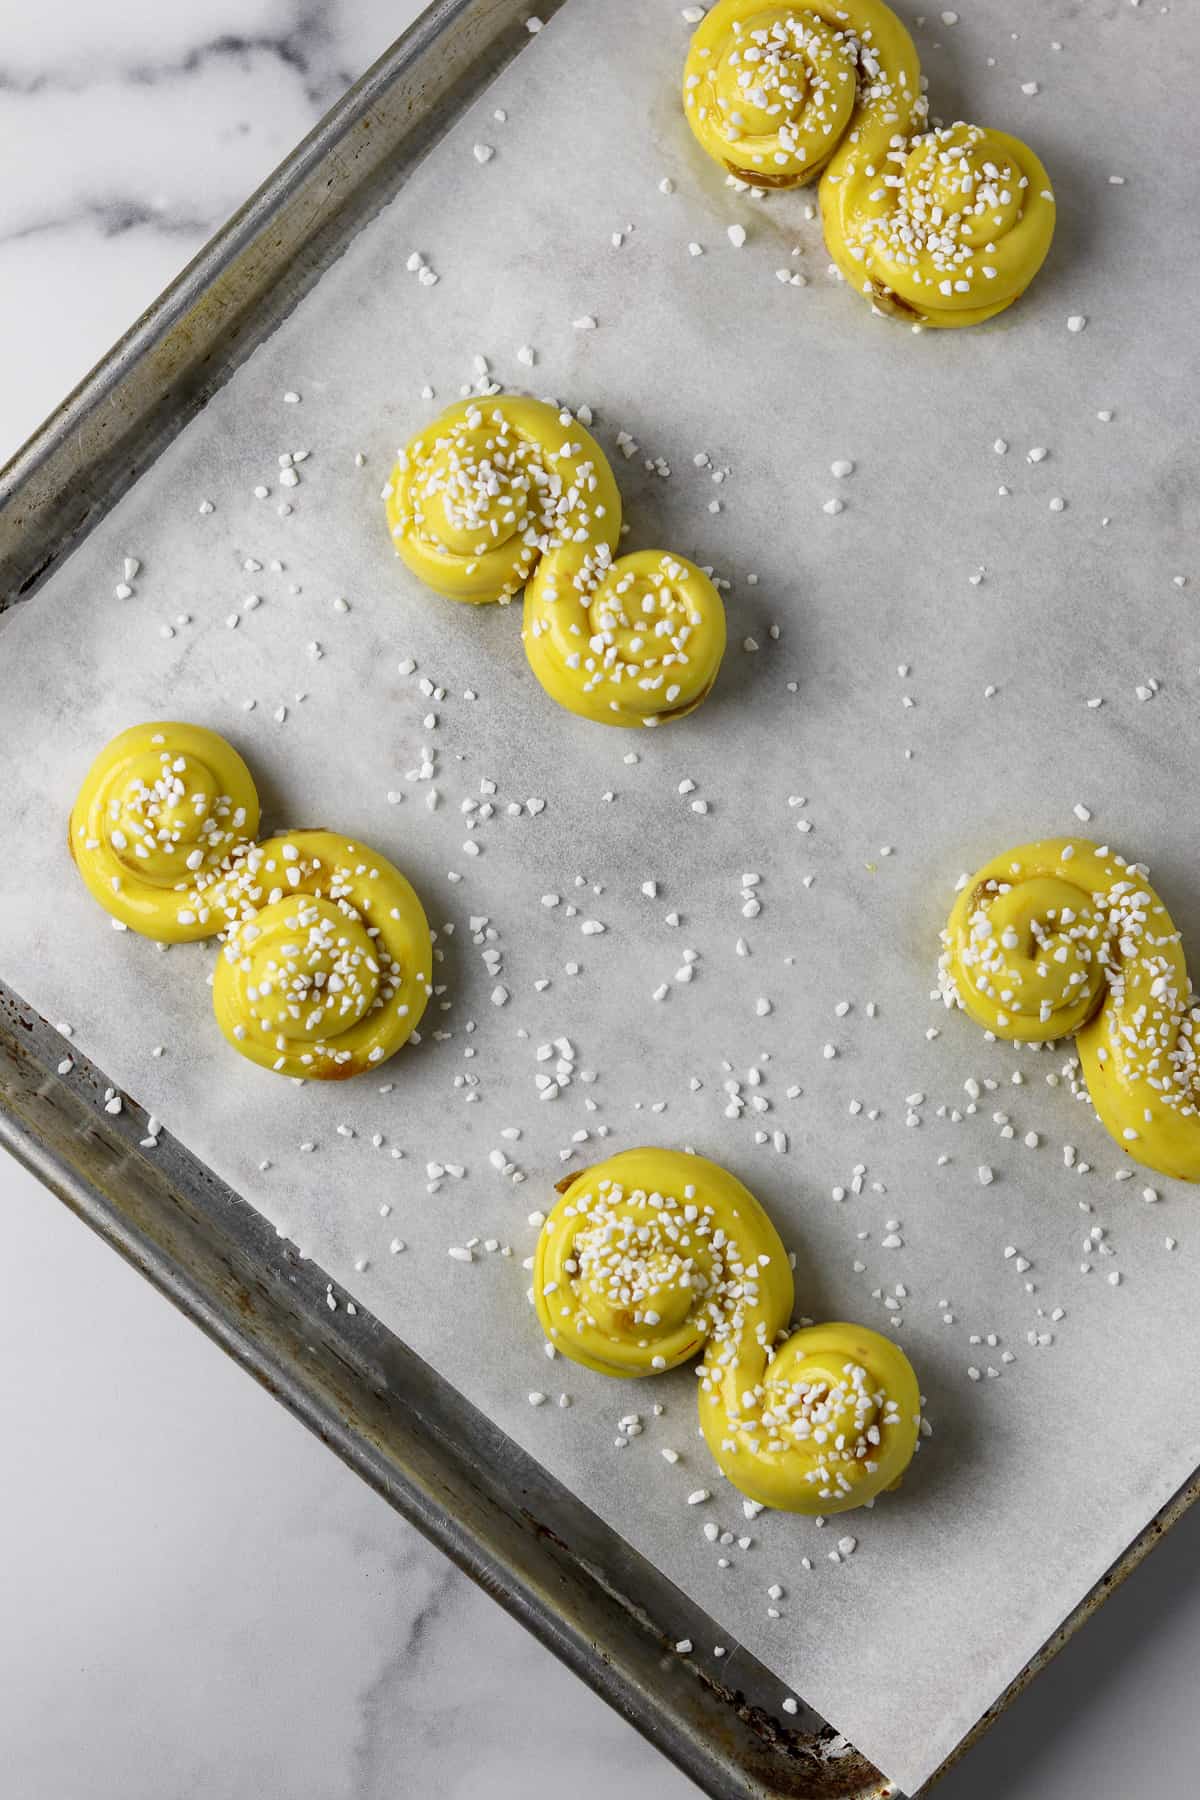 St. Lucia Buns sprinkled with sugar on a sheet pan.